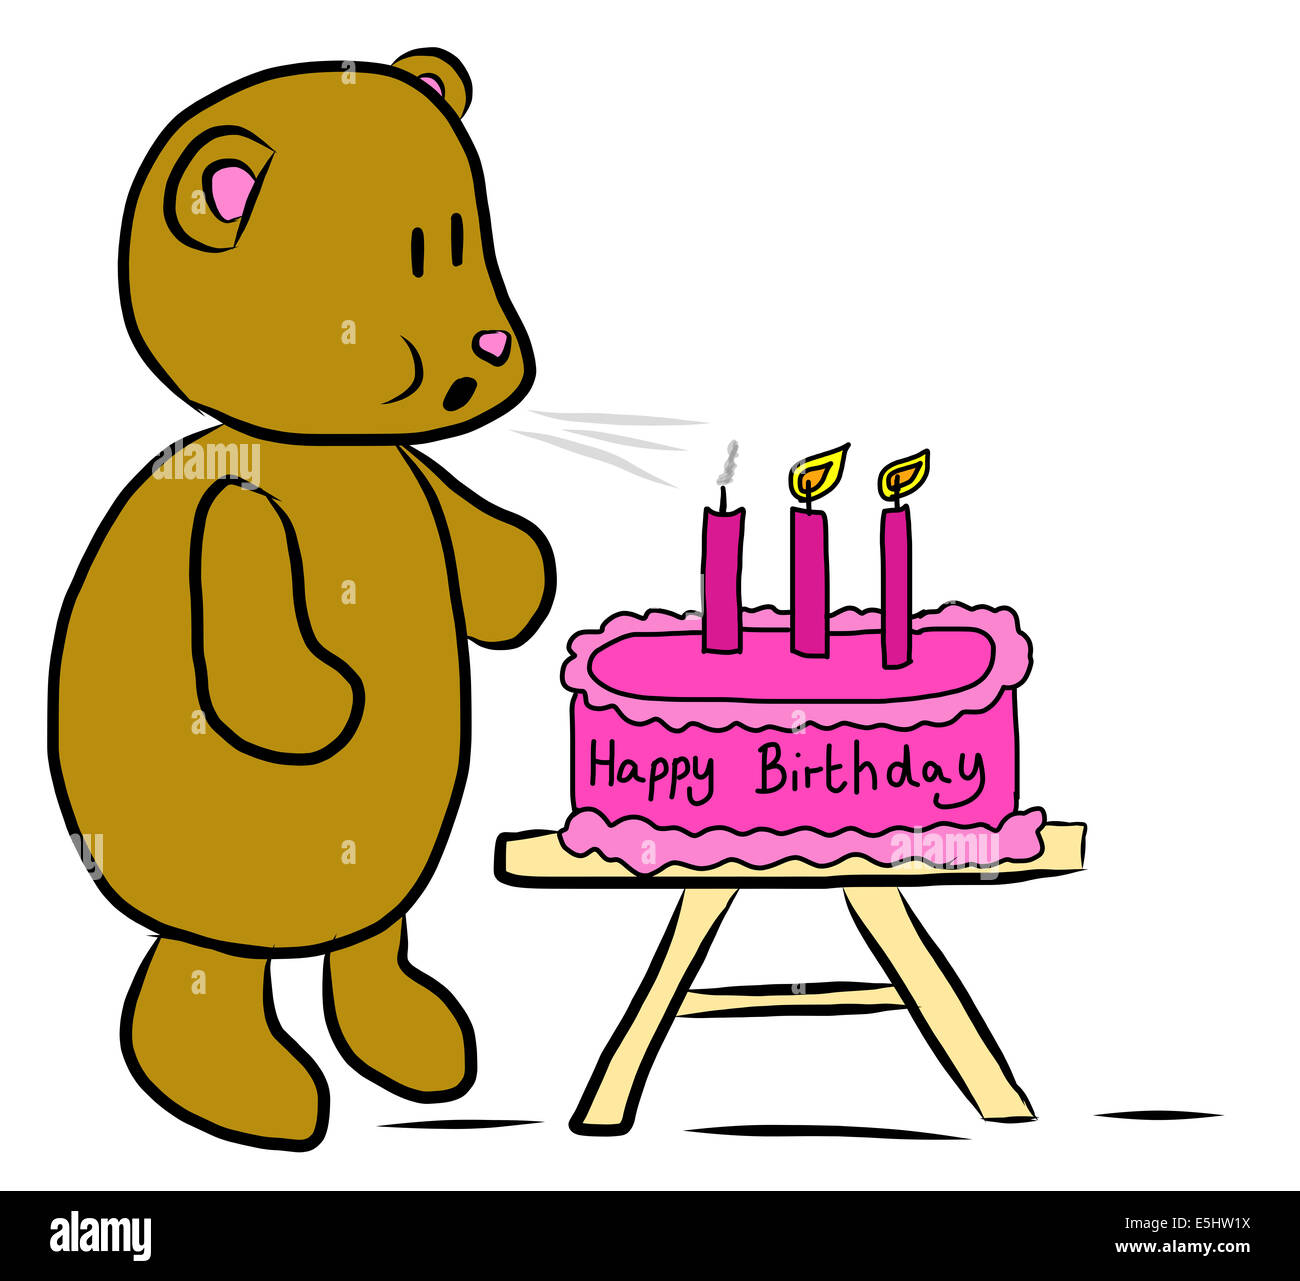 Illustration of a bear blowing out candles on a cake Stock Photo